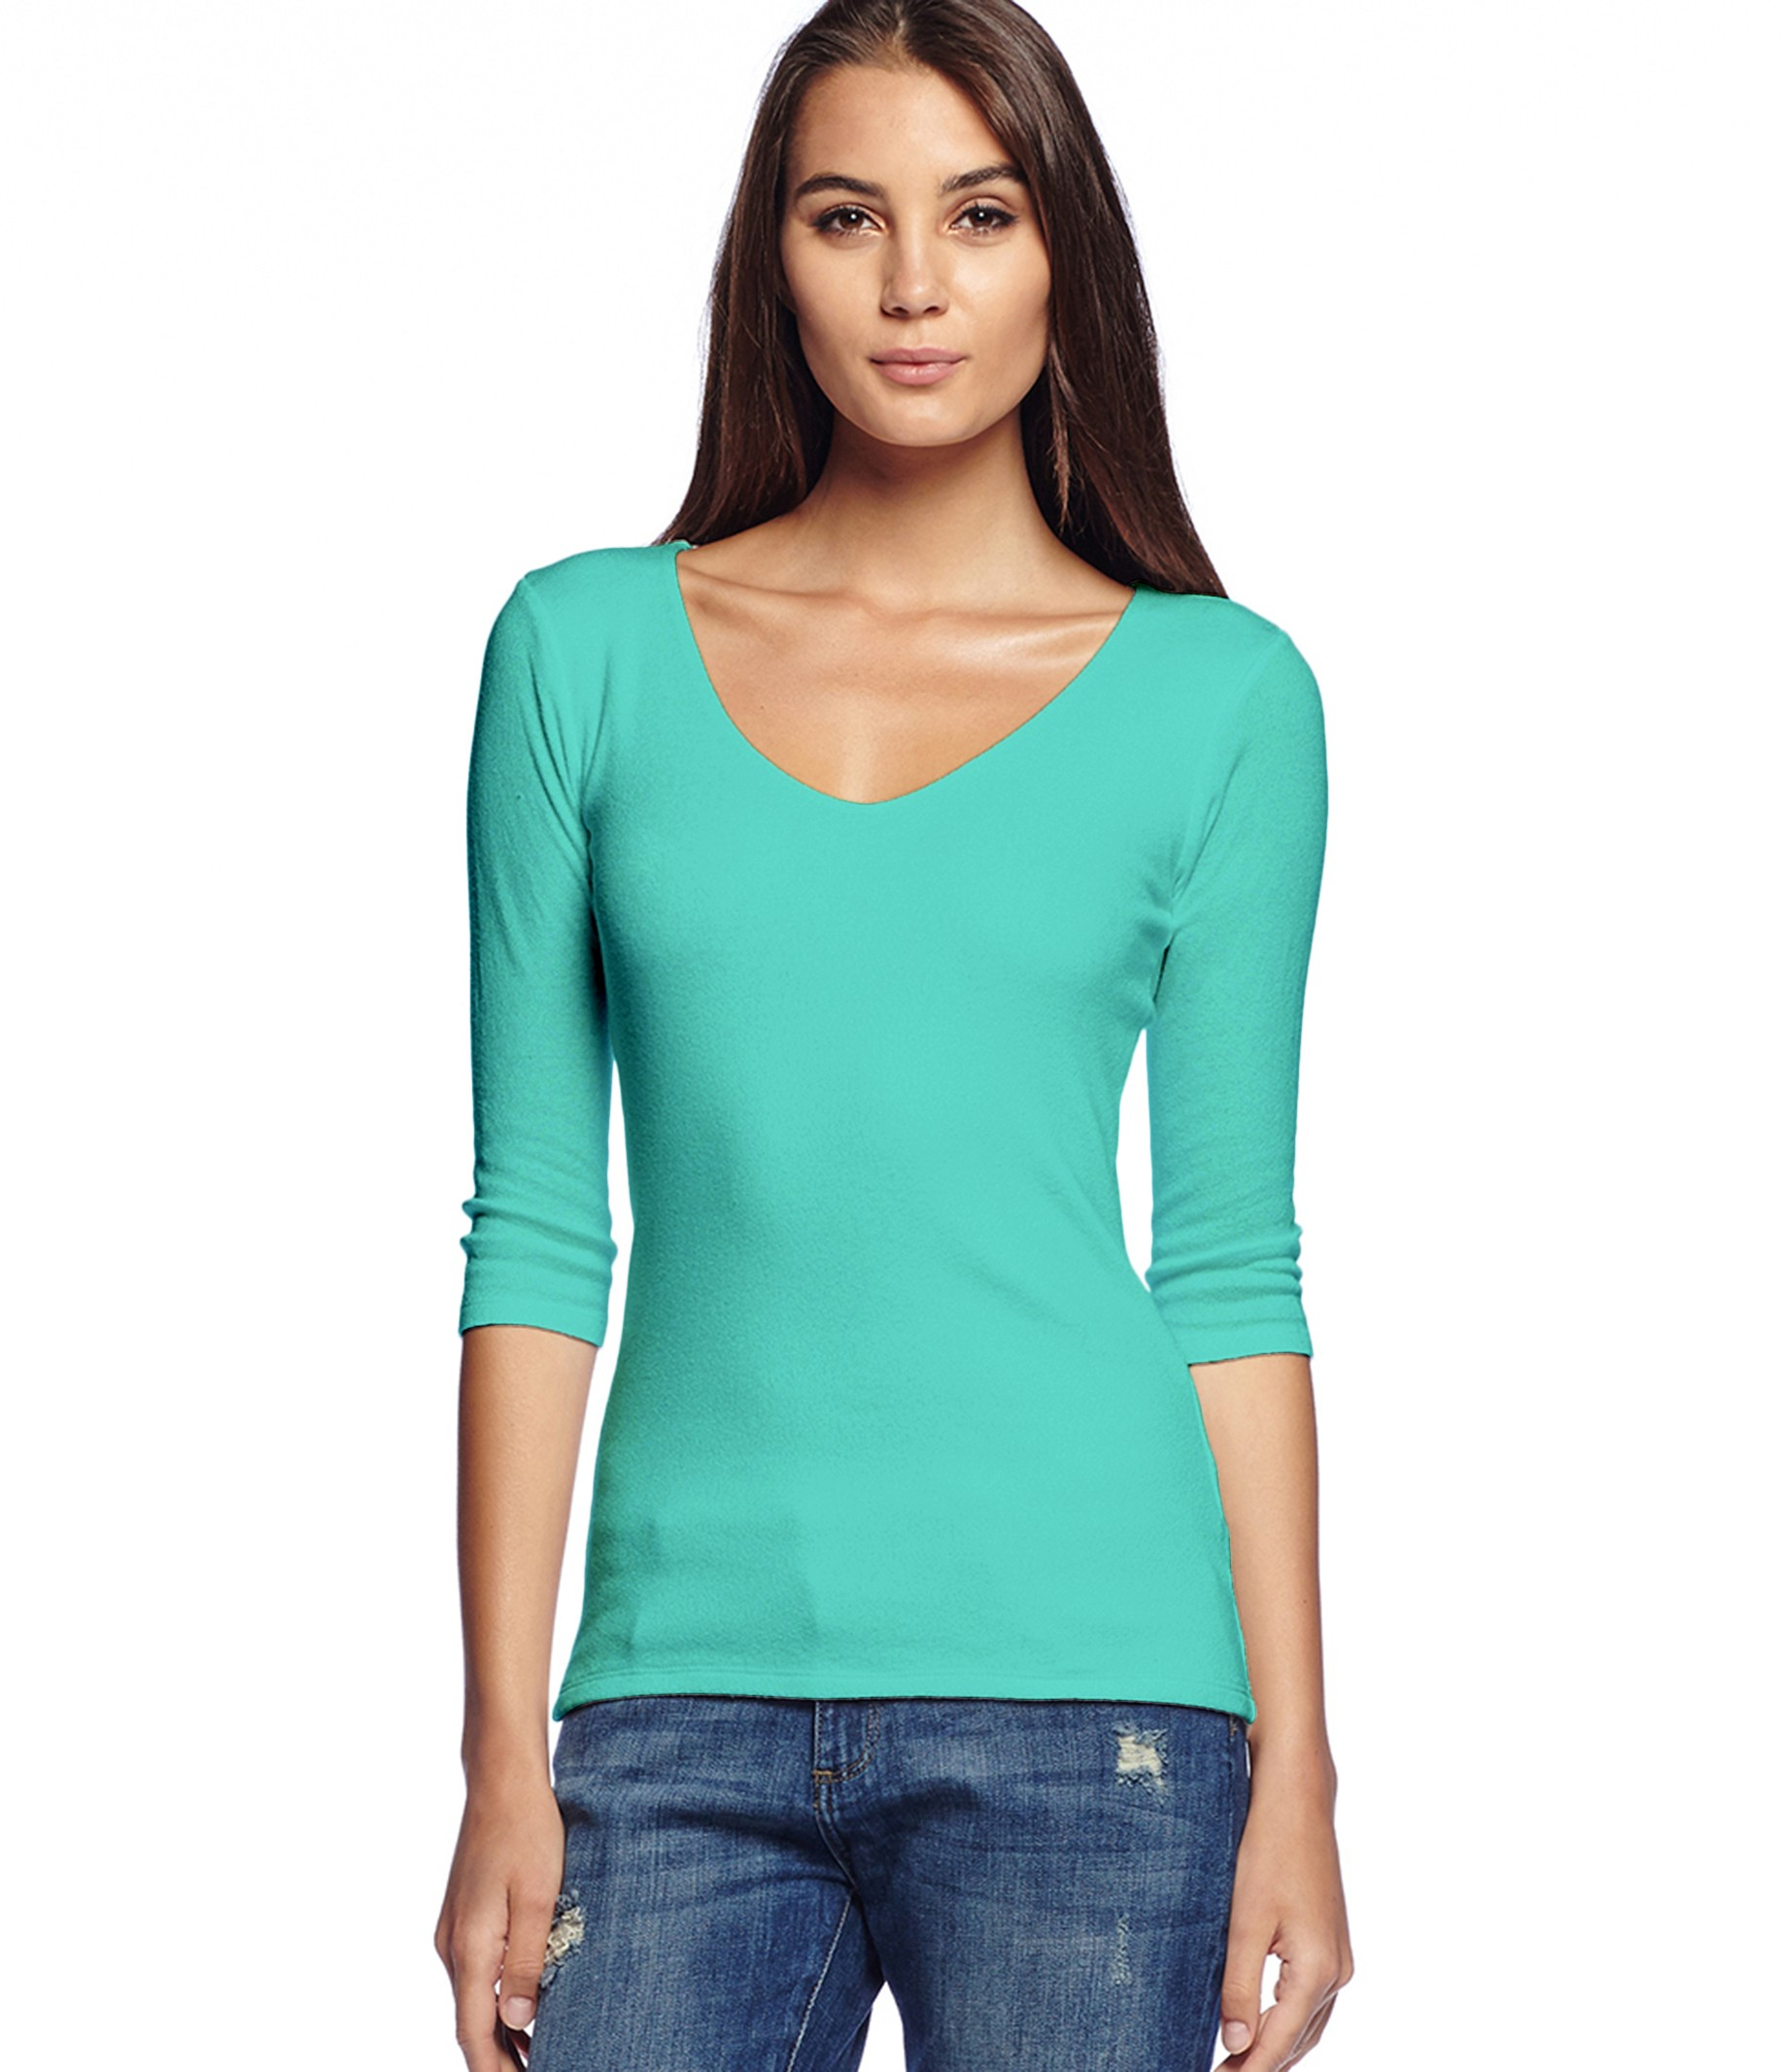 Michael stars Shine 3/4 Sleeve Doubled Front V-neck in Teal (ARUBA) | Lyst